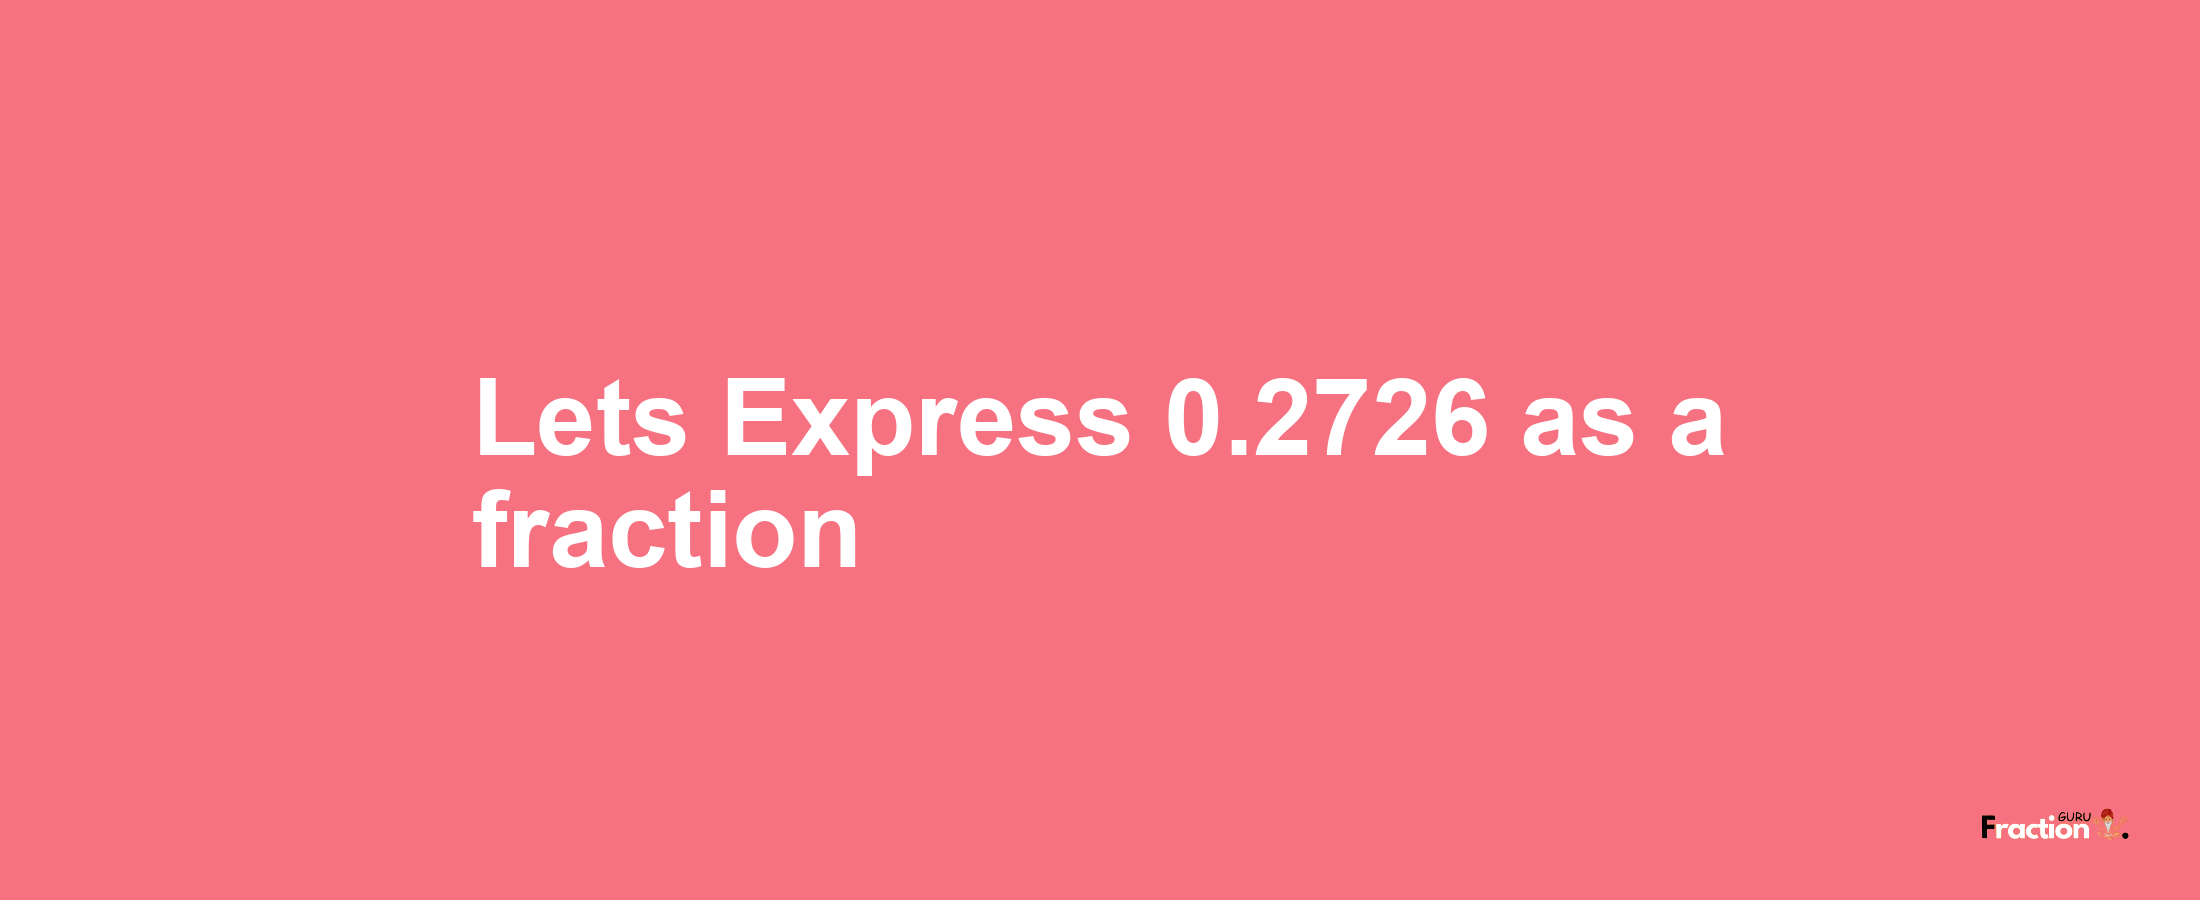 Lets Express 0.2726 as afraction